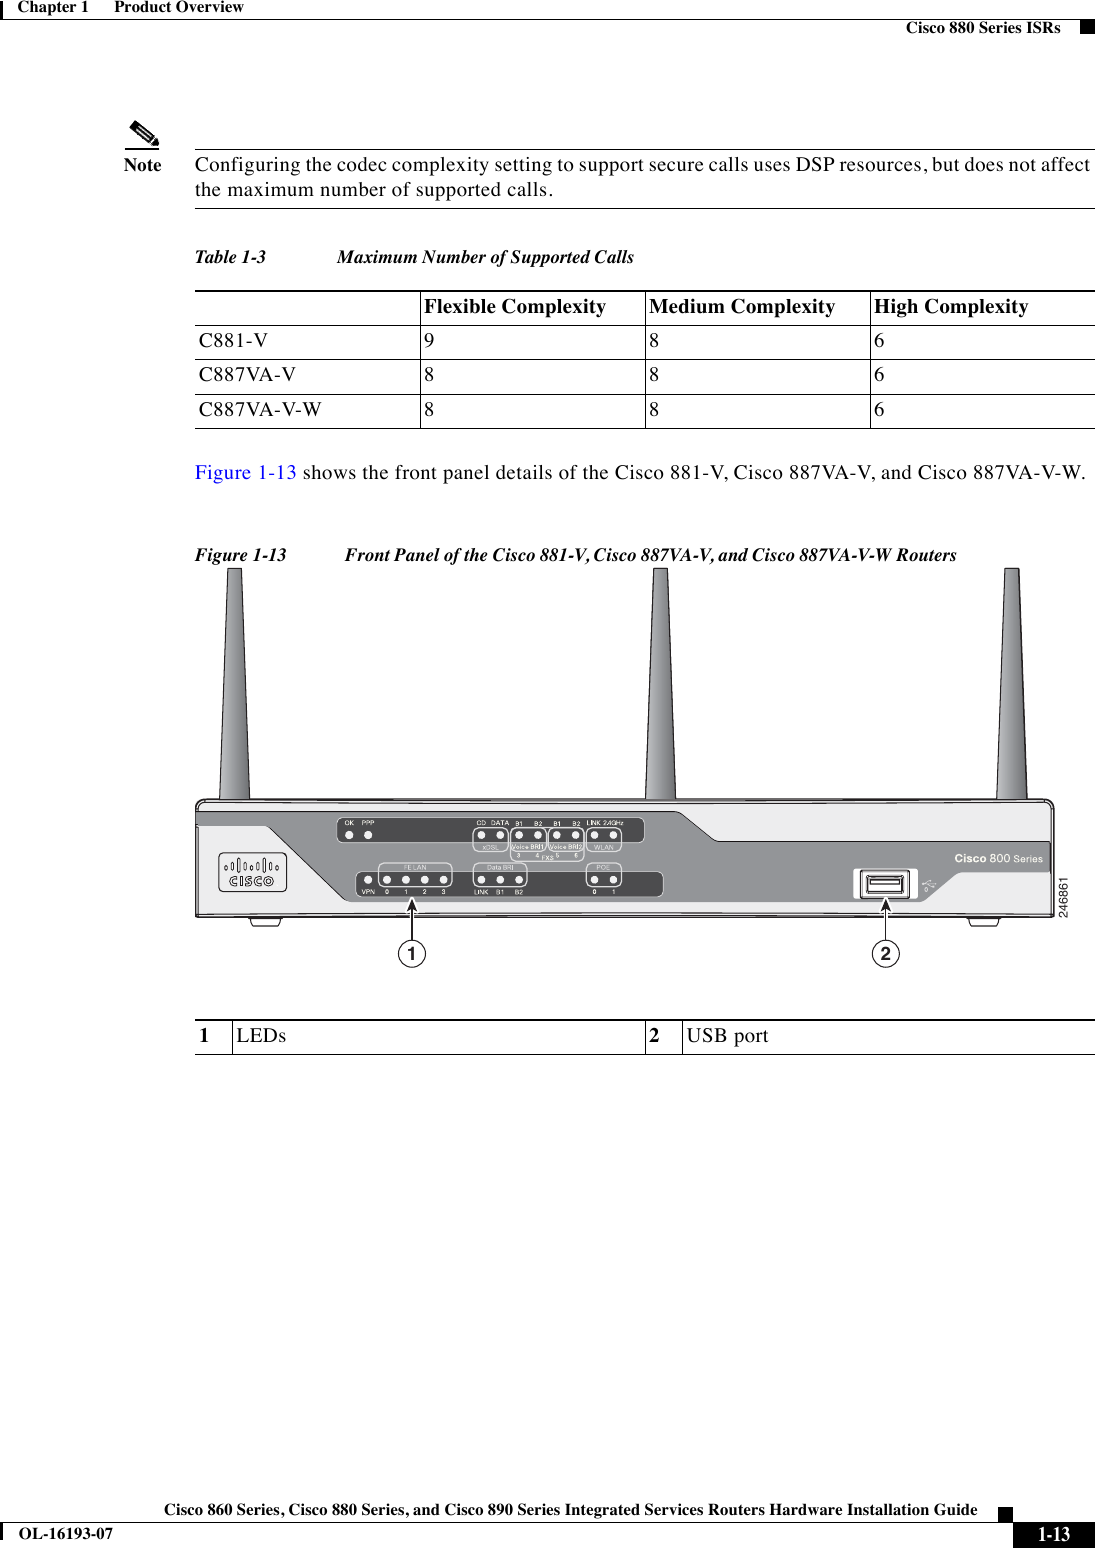  1-13Cisco 860 Series, Cisco 880 Series, and Cisco 890 Series Integrated Services Routers Hardware Installation GuideOL-16193-07Chapter 1      Product Overview  Cisco 880 Series ISRsNoteConfiguring the codec complexity setting to support secure calls uses DSP resources, but does not affect the maximum number of supported calls.Figure 1-13 shows the front panel details of the Cisco 881-V, Cisco 887VA-V, and Cisco 887VA-V-W.Figure 1-13 Front Panel of the Cisco 881-V, Cisco 887VA-V, and Cisco 887VA-V-W RoutersTabl e 1-3 Maximum Number of Supported CallsFlexible Complexity Medium Complexity High ComplexityC881-V 986C887VA-V 886C887VA-V-W 8862468611 21LEDs 2USB port